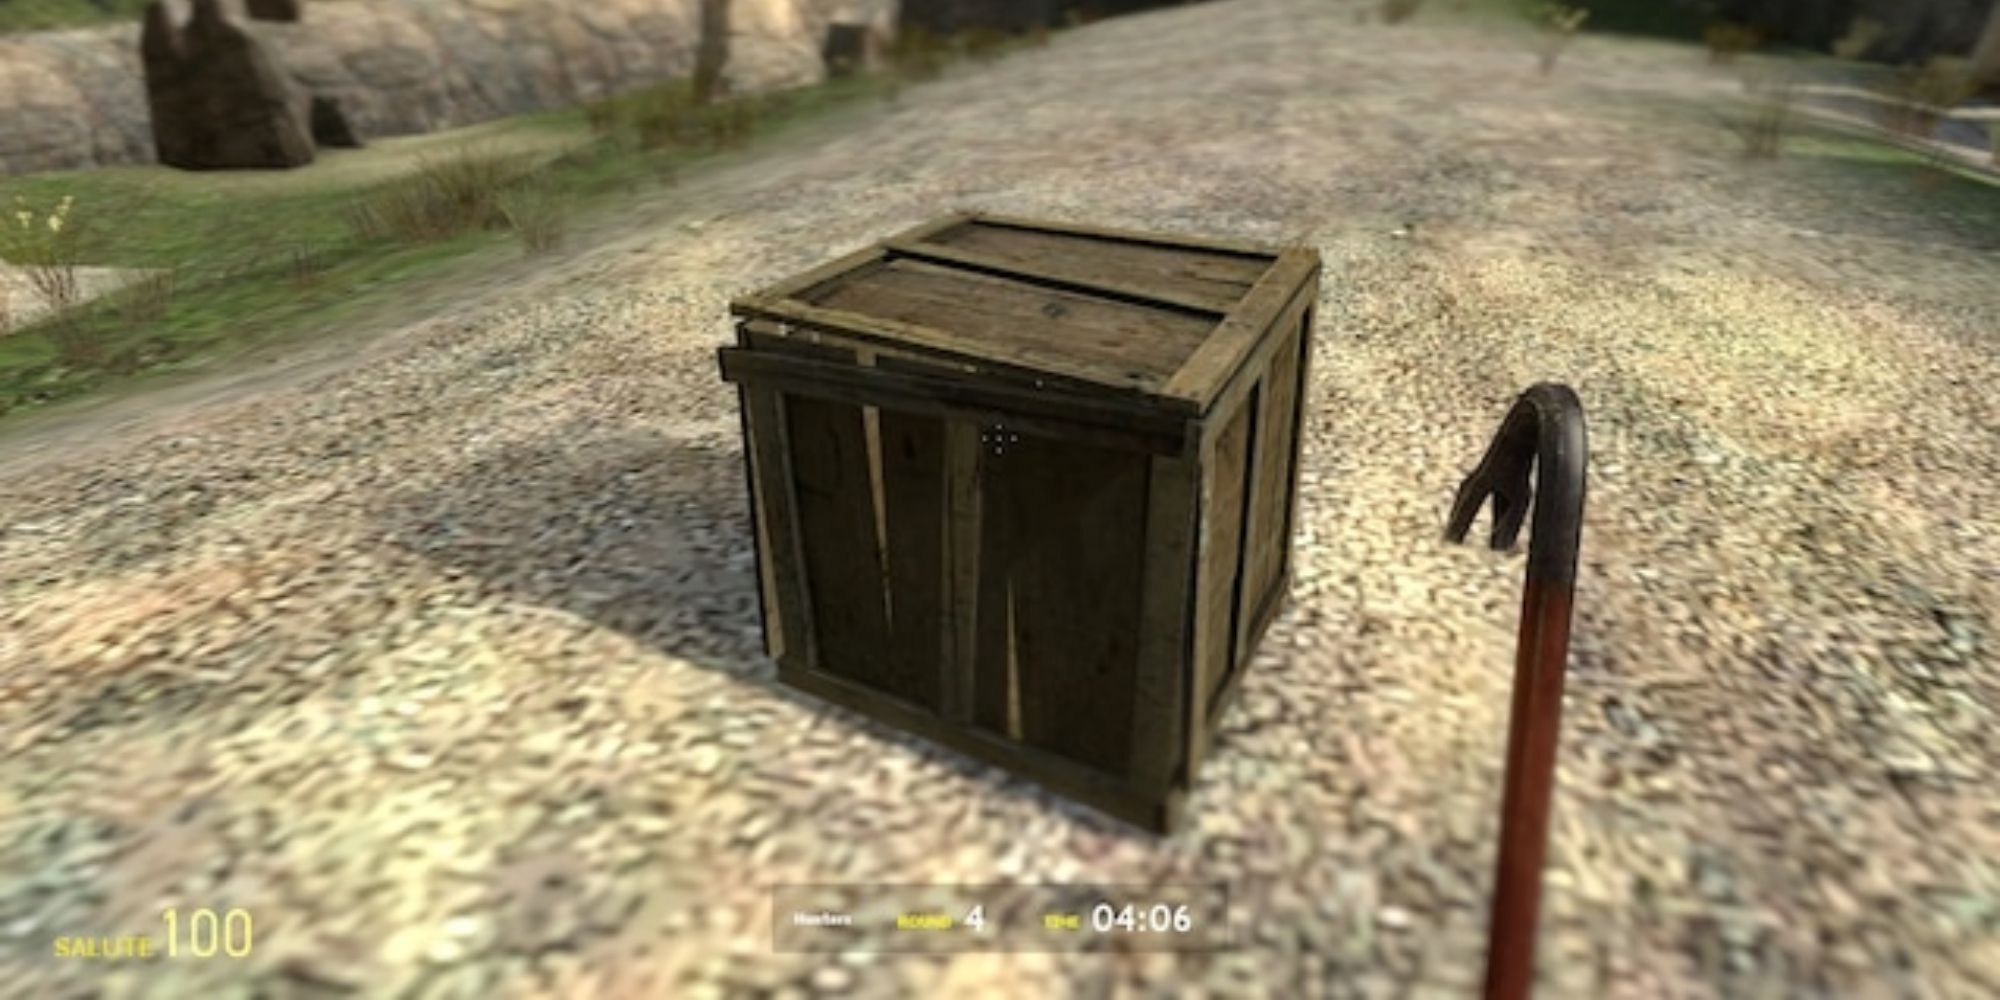 a wooden crate sitting out in the middle of nowhere